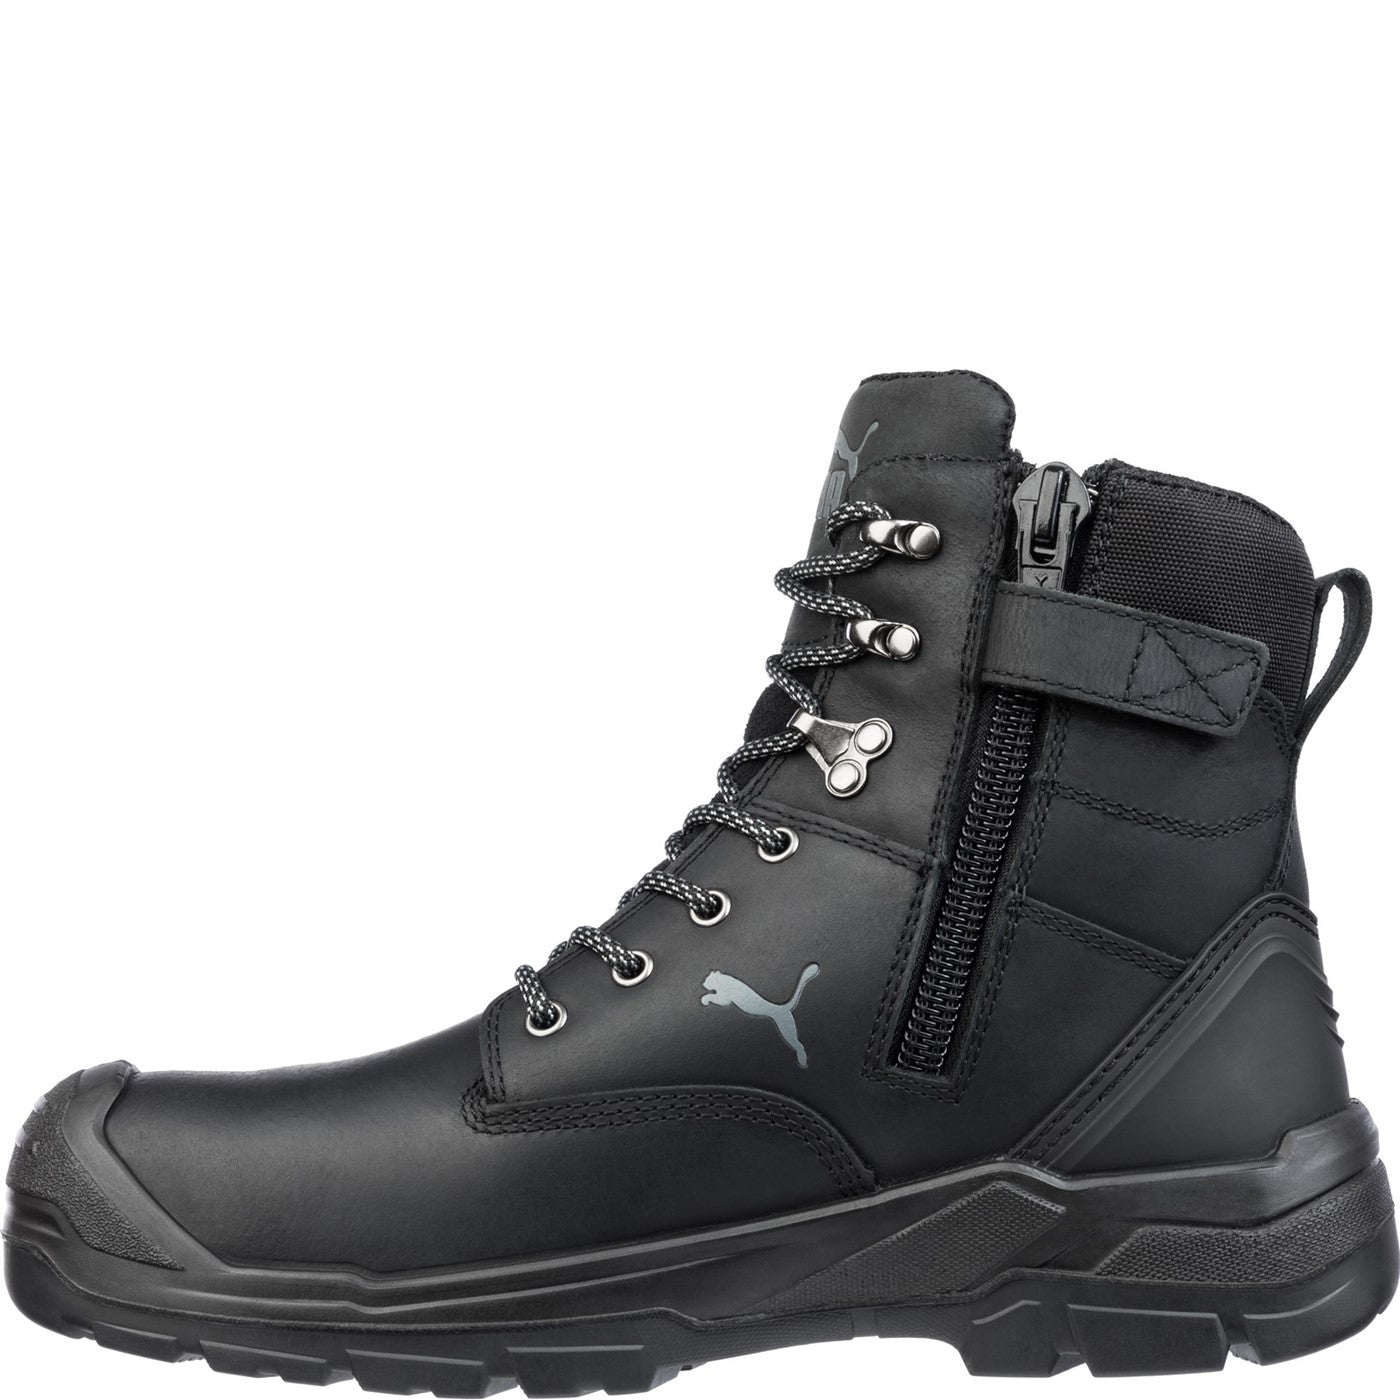 Men's Puma Safety Conquest 630730 High Safety Boot